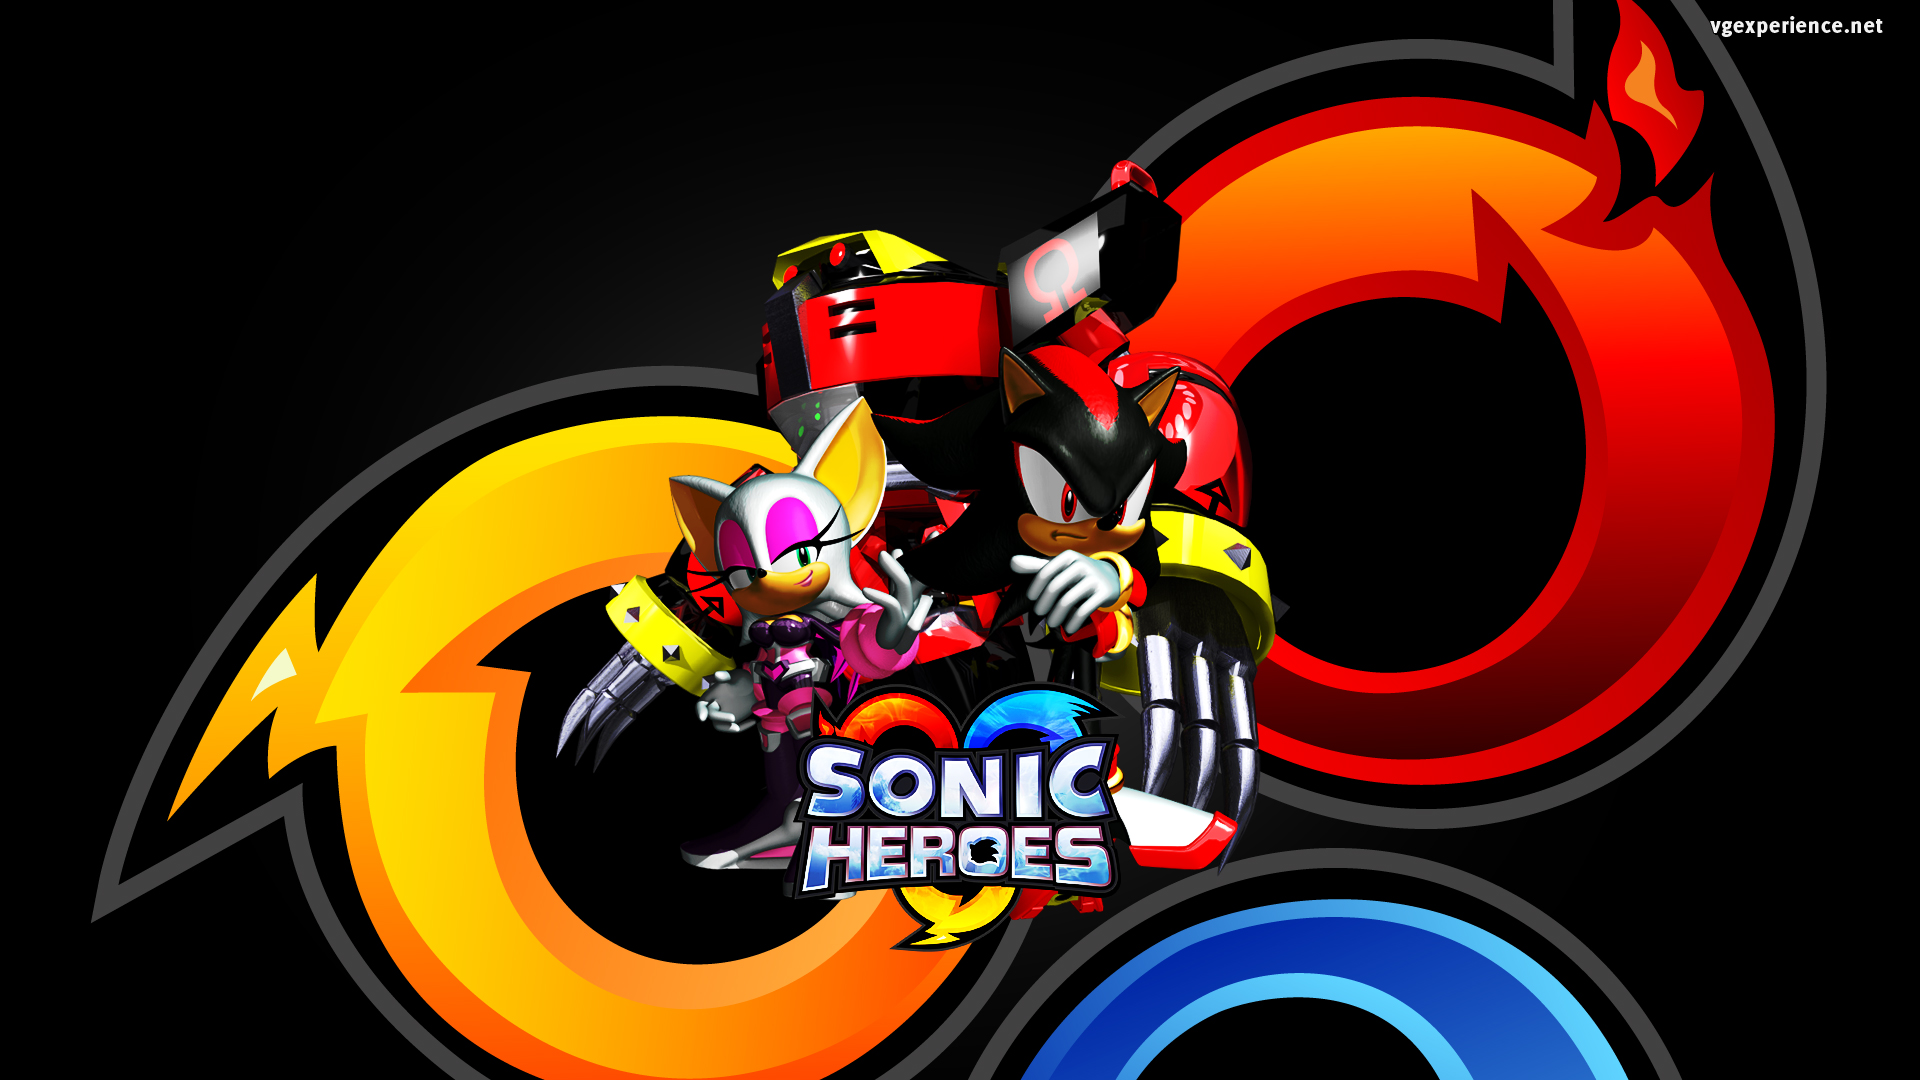 Video Game Sonic Heroes 1920x1080